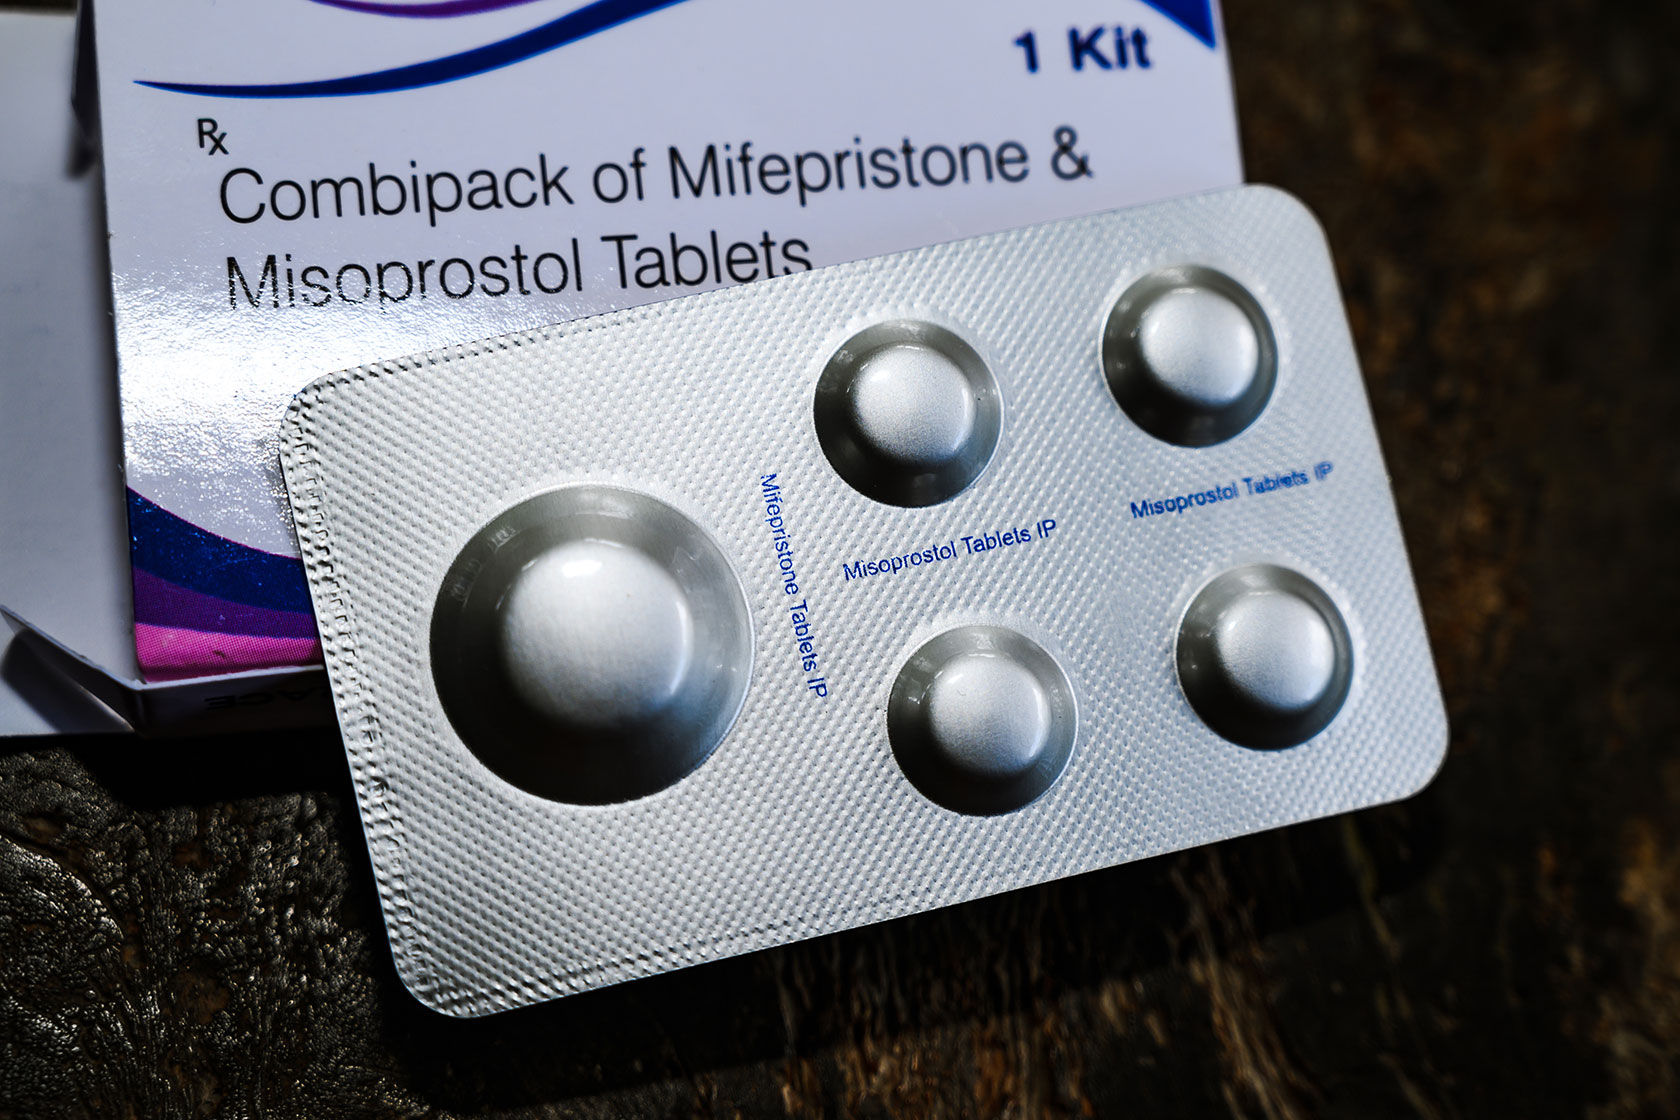 A “combipack” of mifepristone and misoprostol pills is seen at a pharmacy.